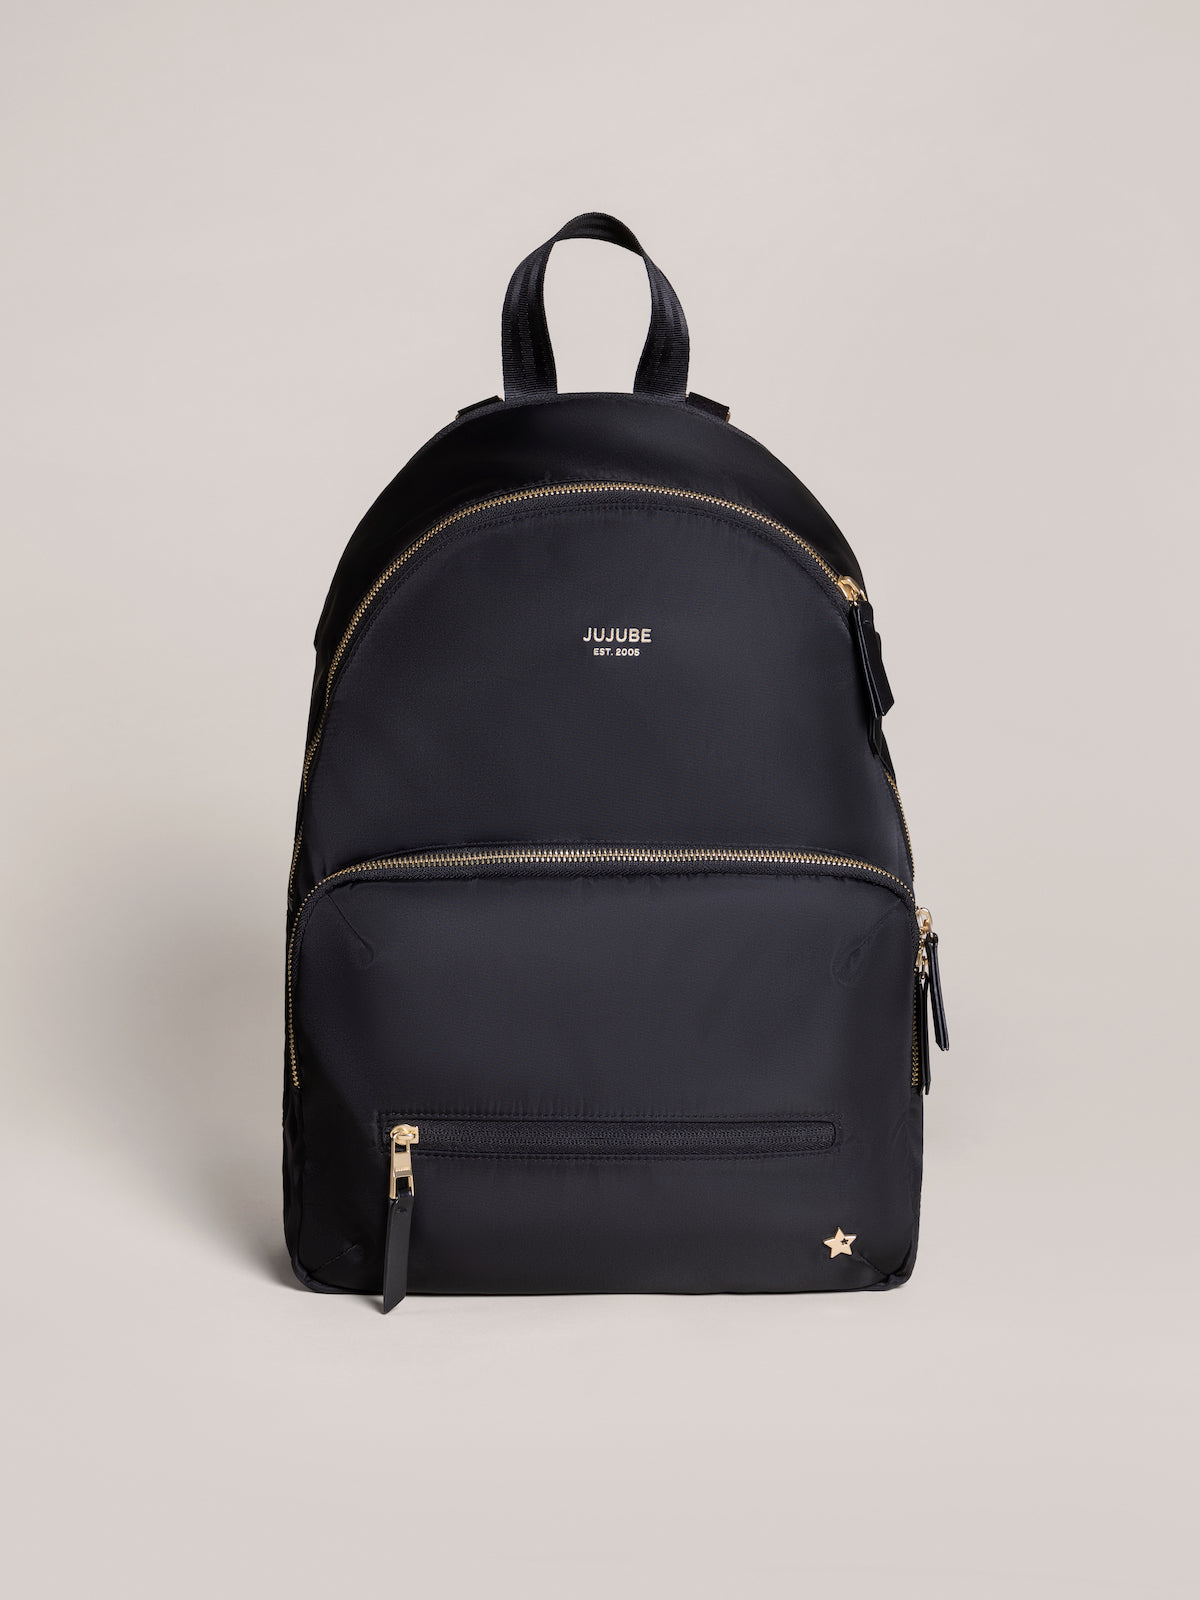 Stay Stylish And Secure With A Wholesale backpack bag 